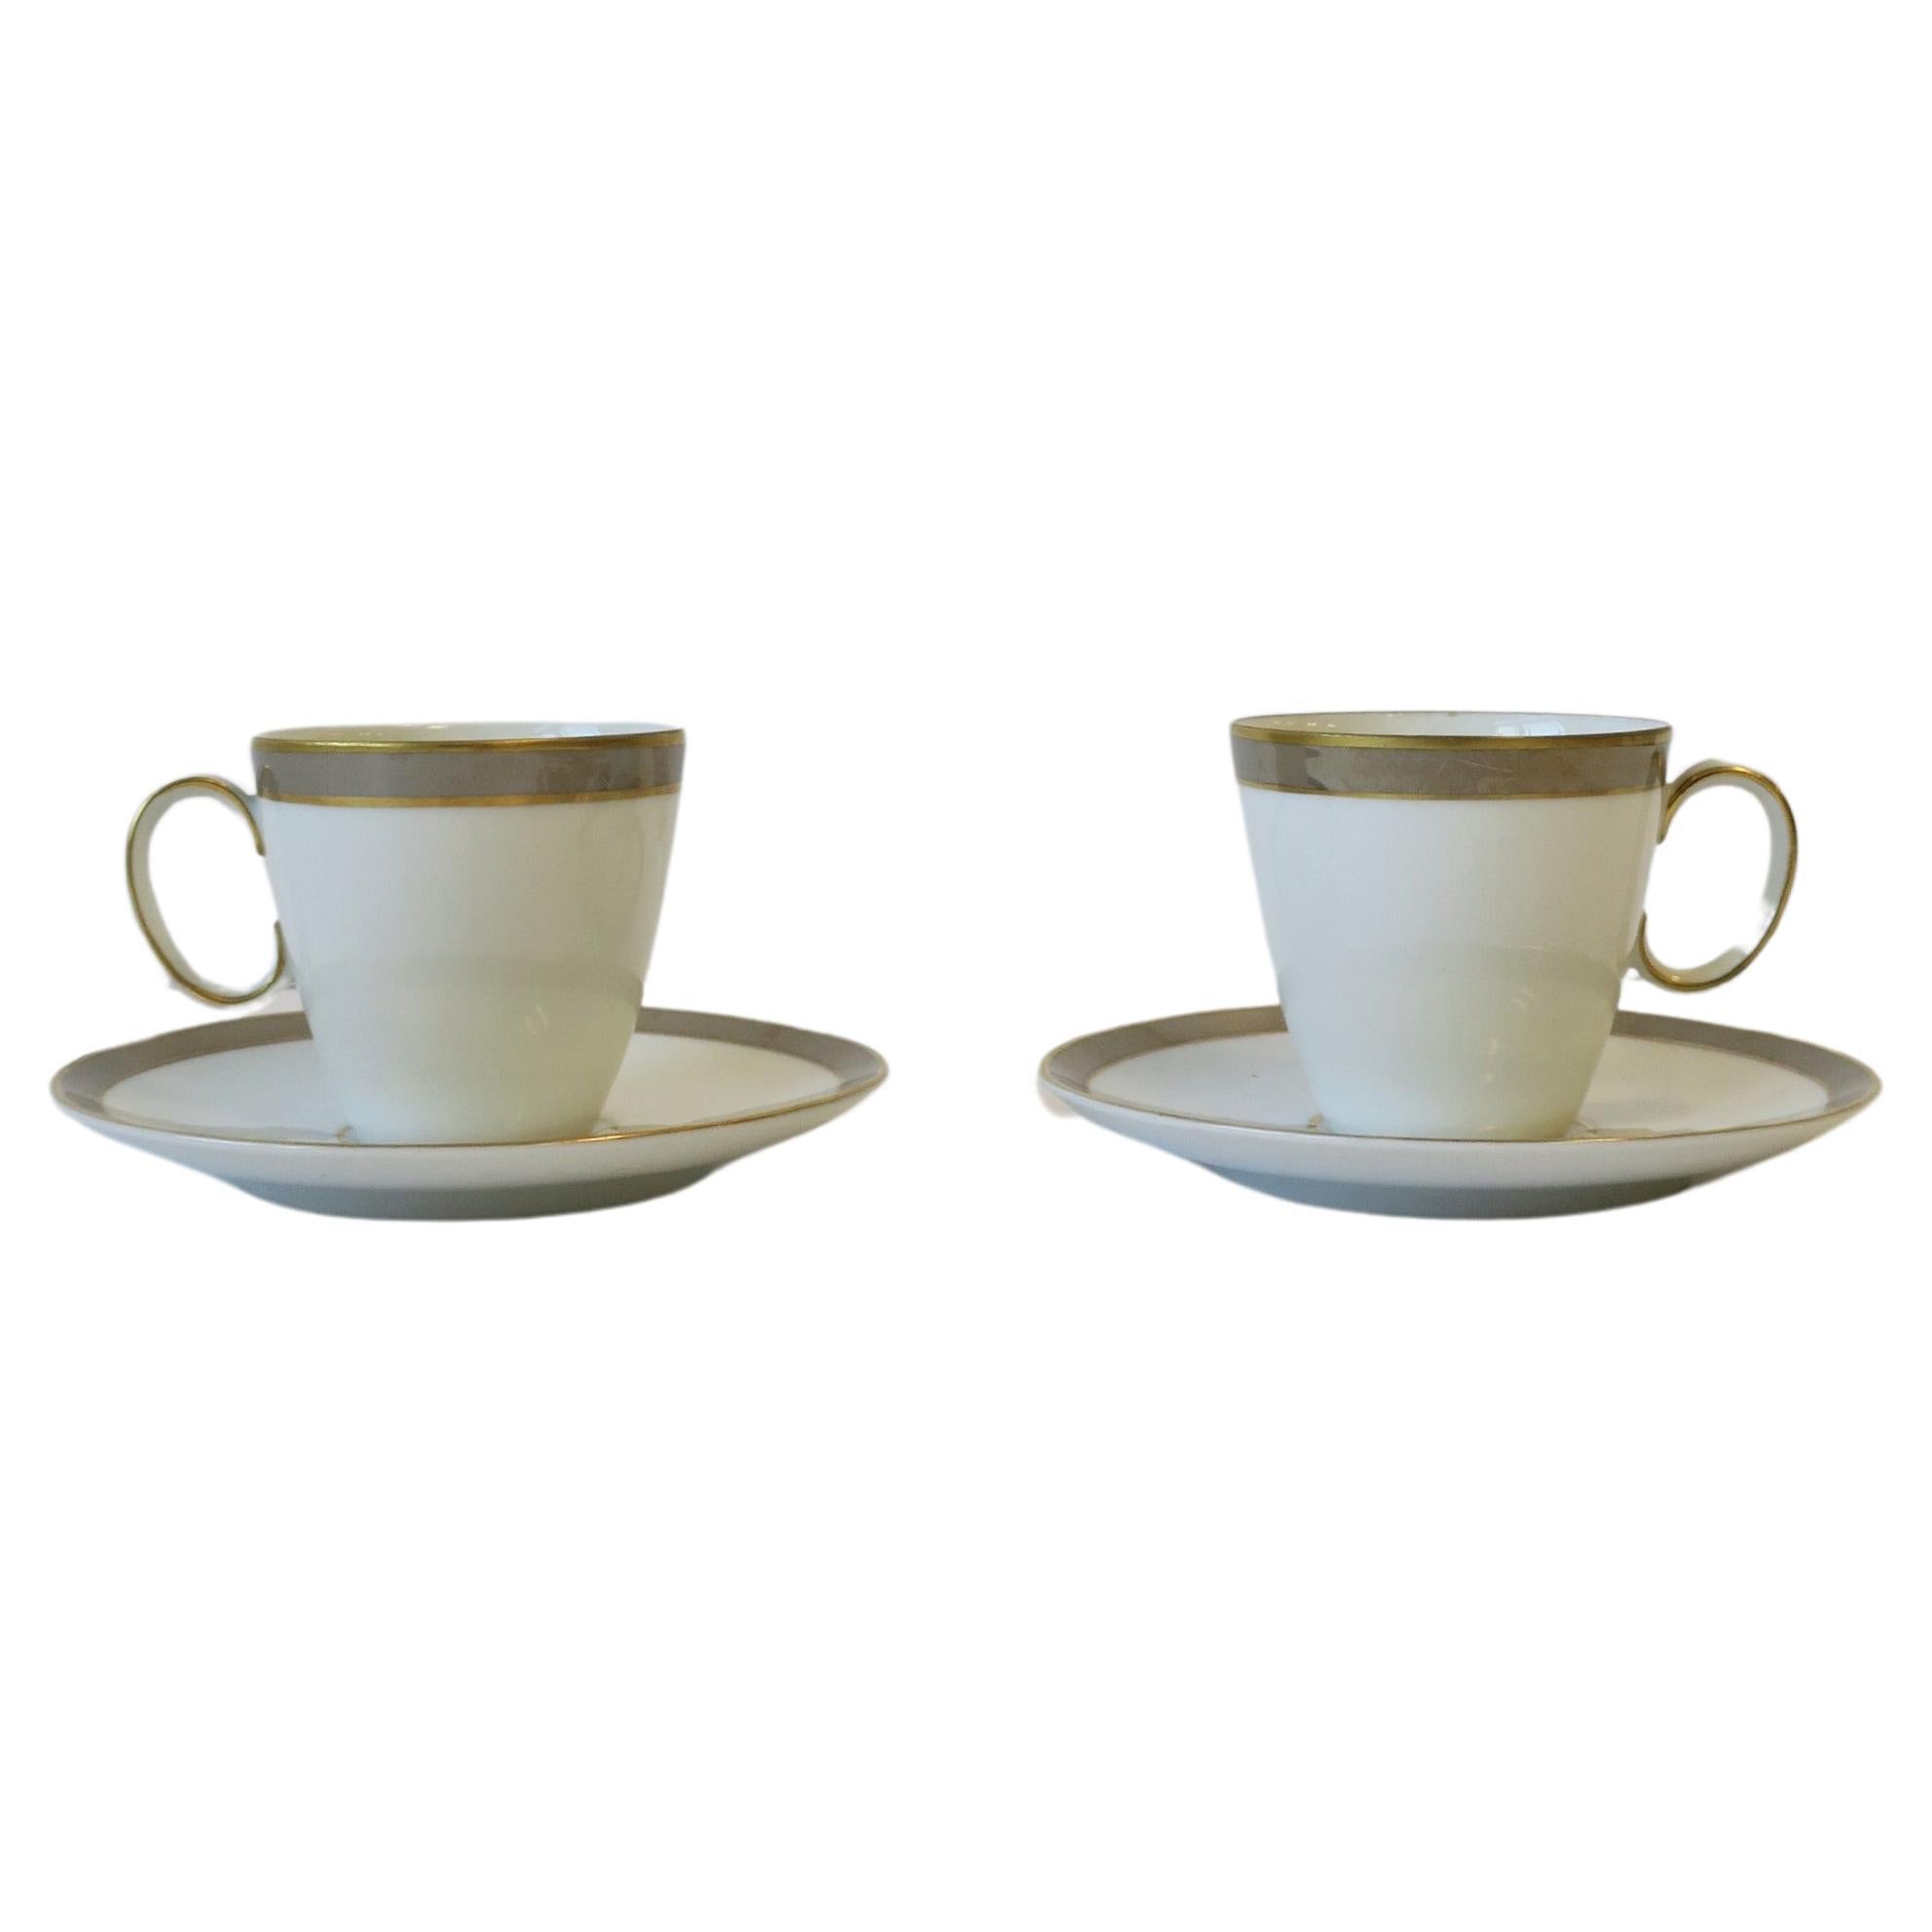 Ray Loewy White Grey Gold Porcelain Espresso Coffee Cup & Saucer, Set of 2 For Sale